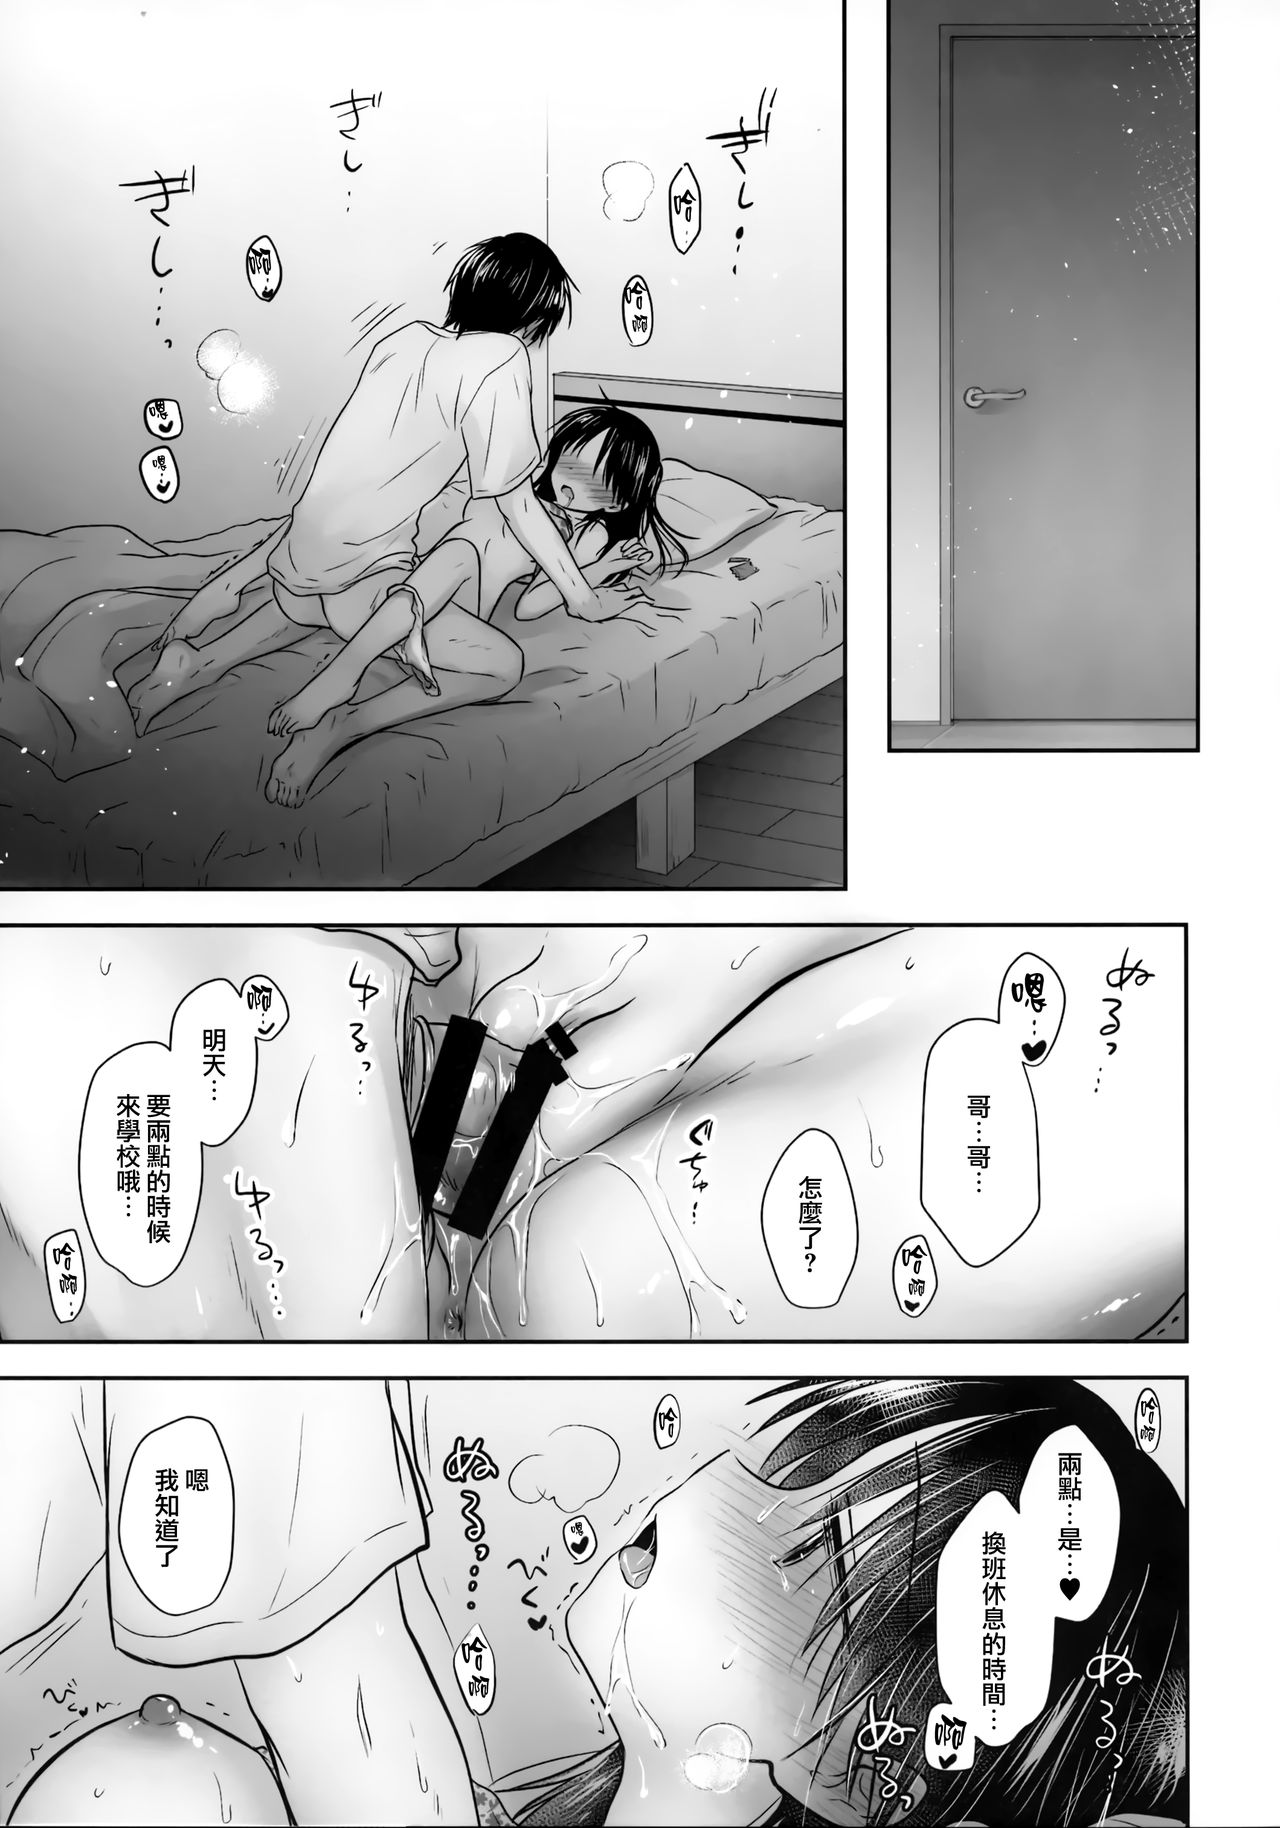 (C96) [Aquadrop (Mikami Mika)] Omoide Sex [Chinese] [山樱汉化] page 6 full